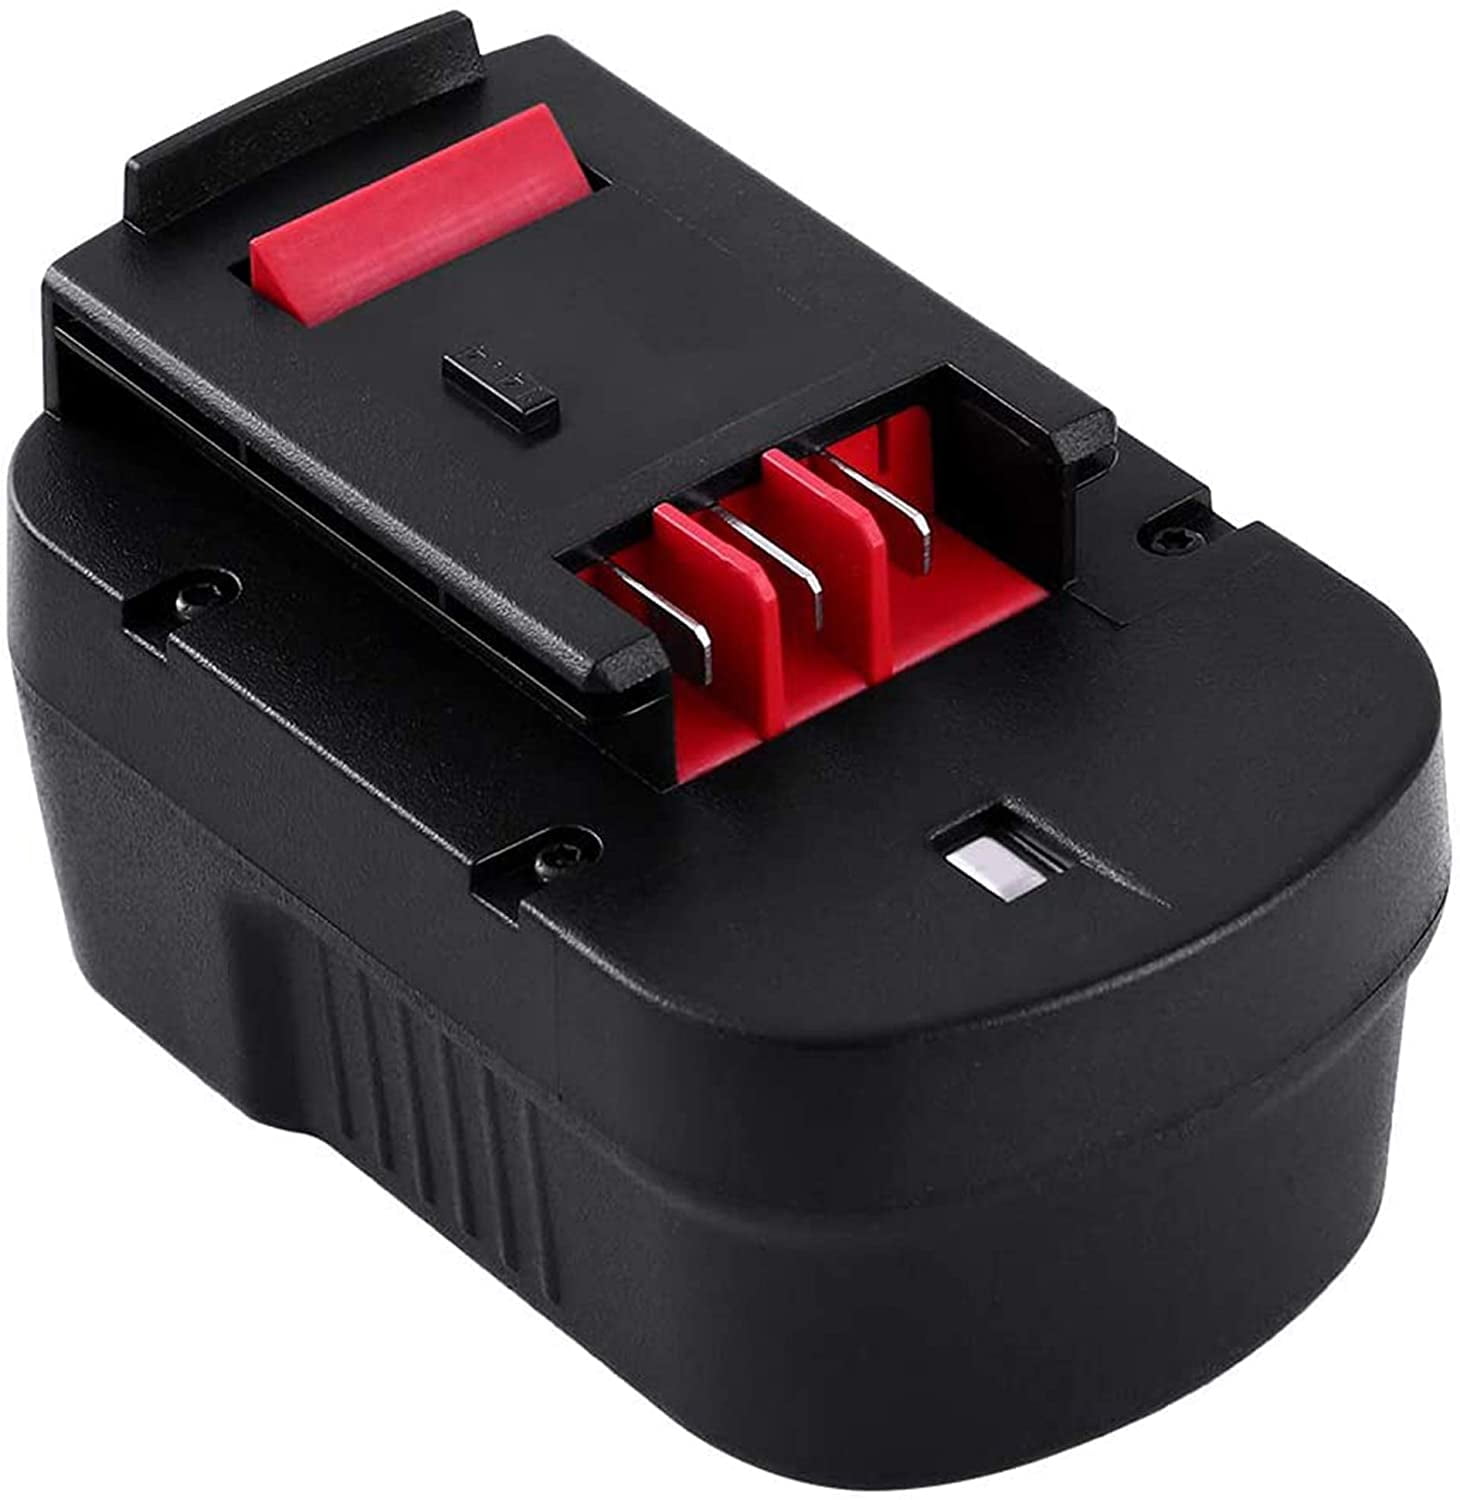 3.6Ah HPB14 Replace for Black and Decker 14.4V Battery Firestorm